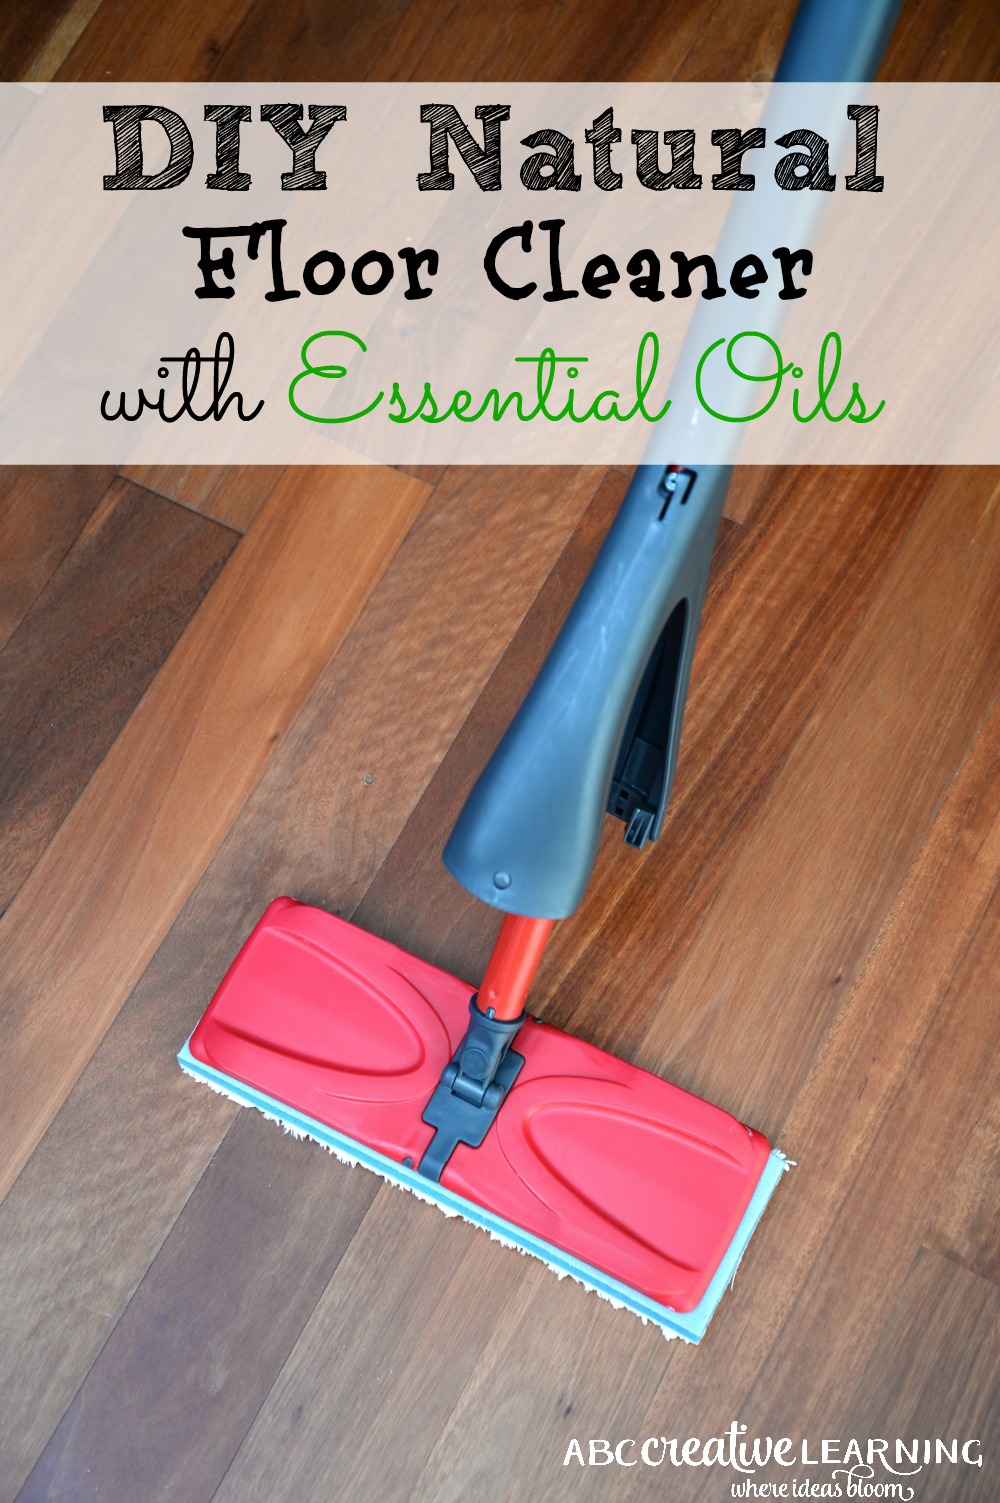 Floor Cleaner with Essential Oils